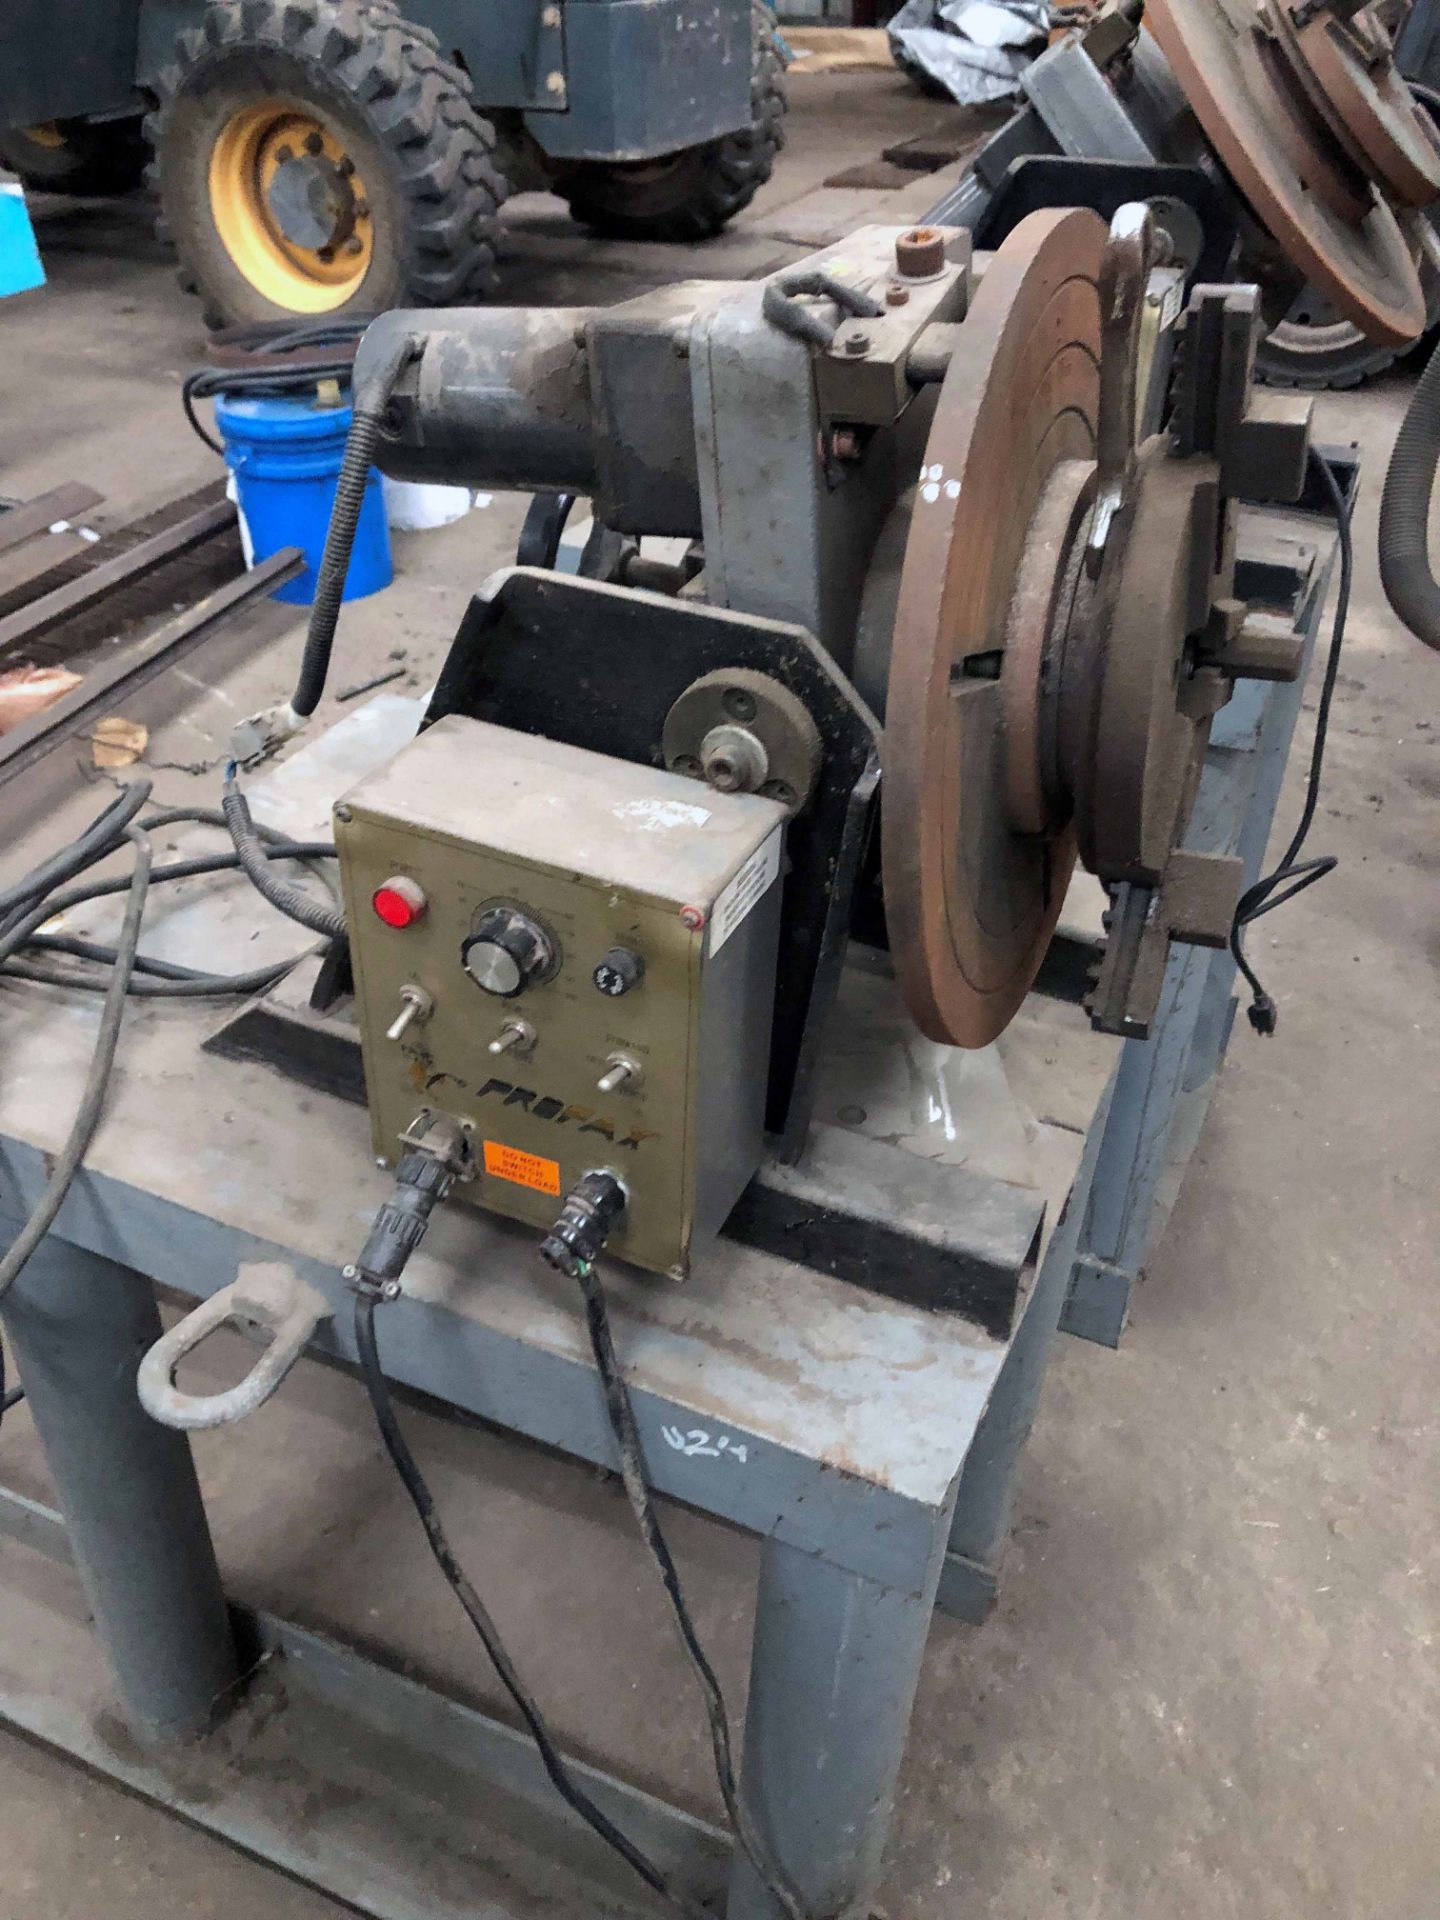 WELDING POSITIONER, PROFAX MDL. WP-250, S/N WP-2551 (Located at: Pitts by JJ, 3426 Hopper Road,